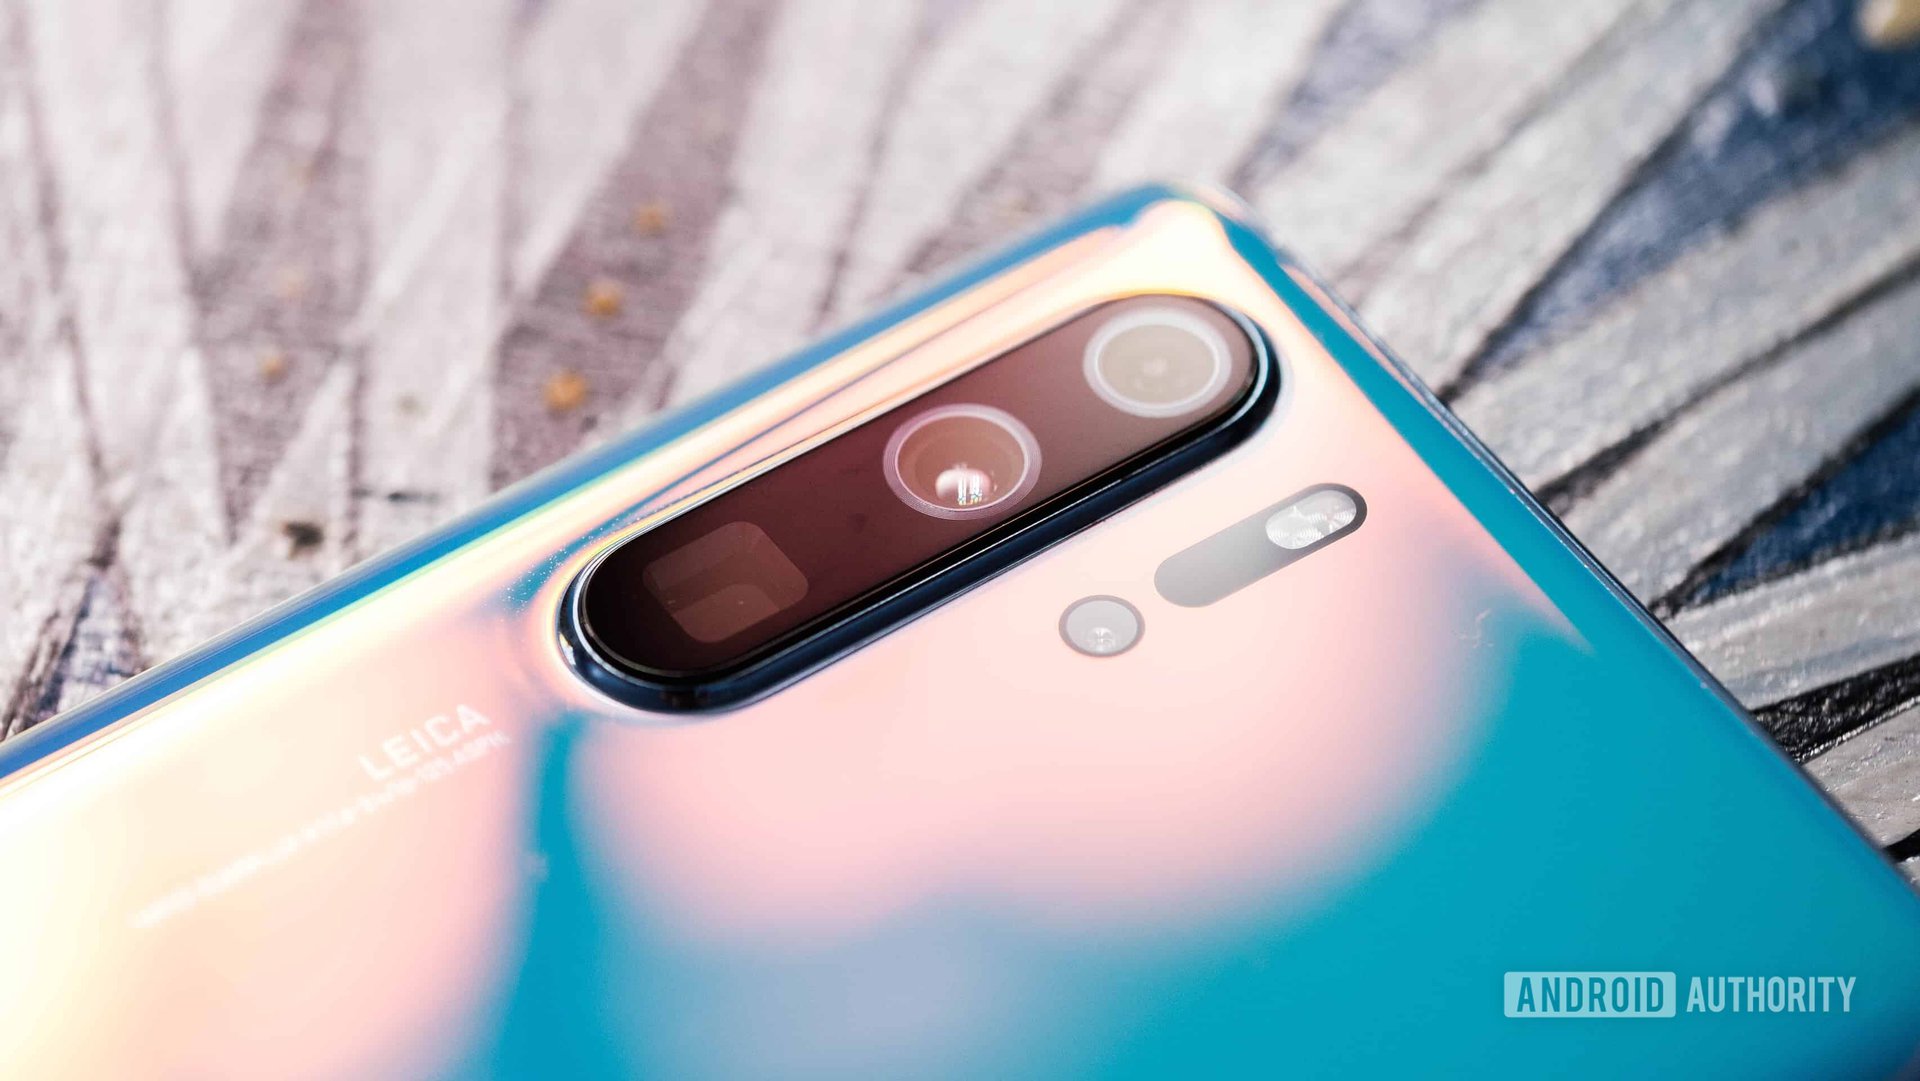 HUAWEI P30 review: A superpowers